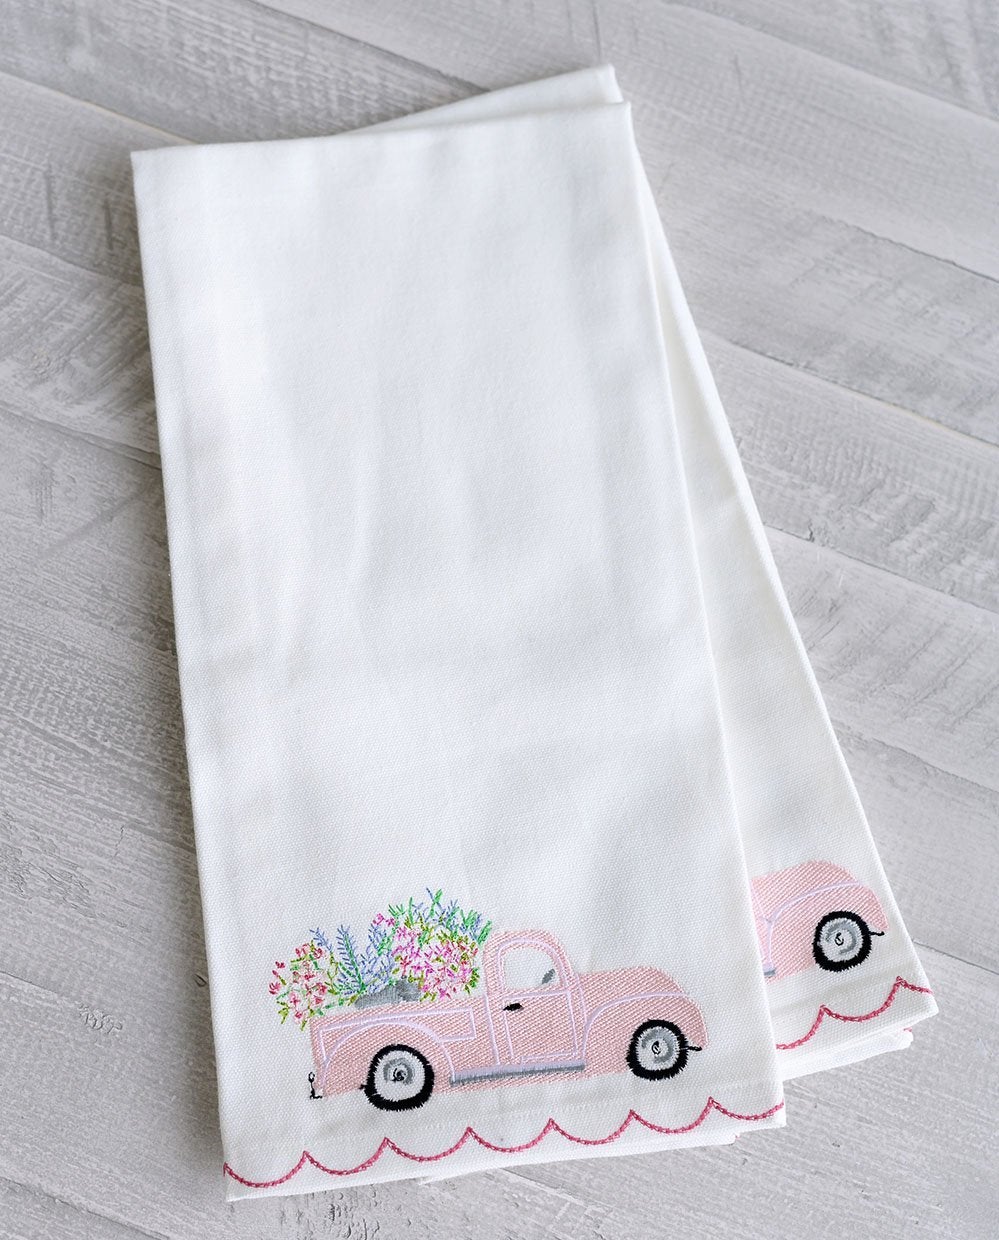 Blossom Truck Tea Towel Set- 2- spring kitchen and table accessories